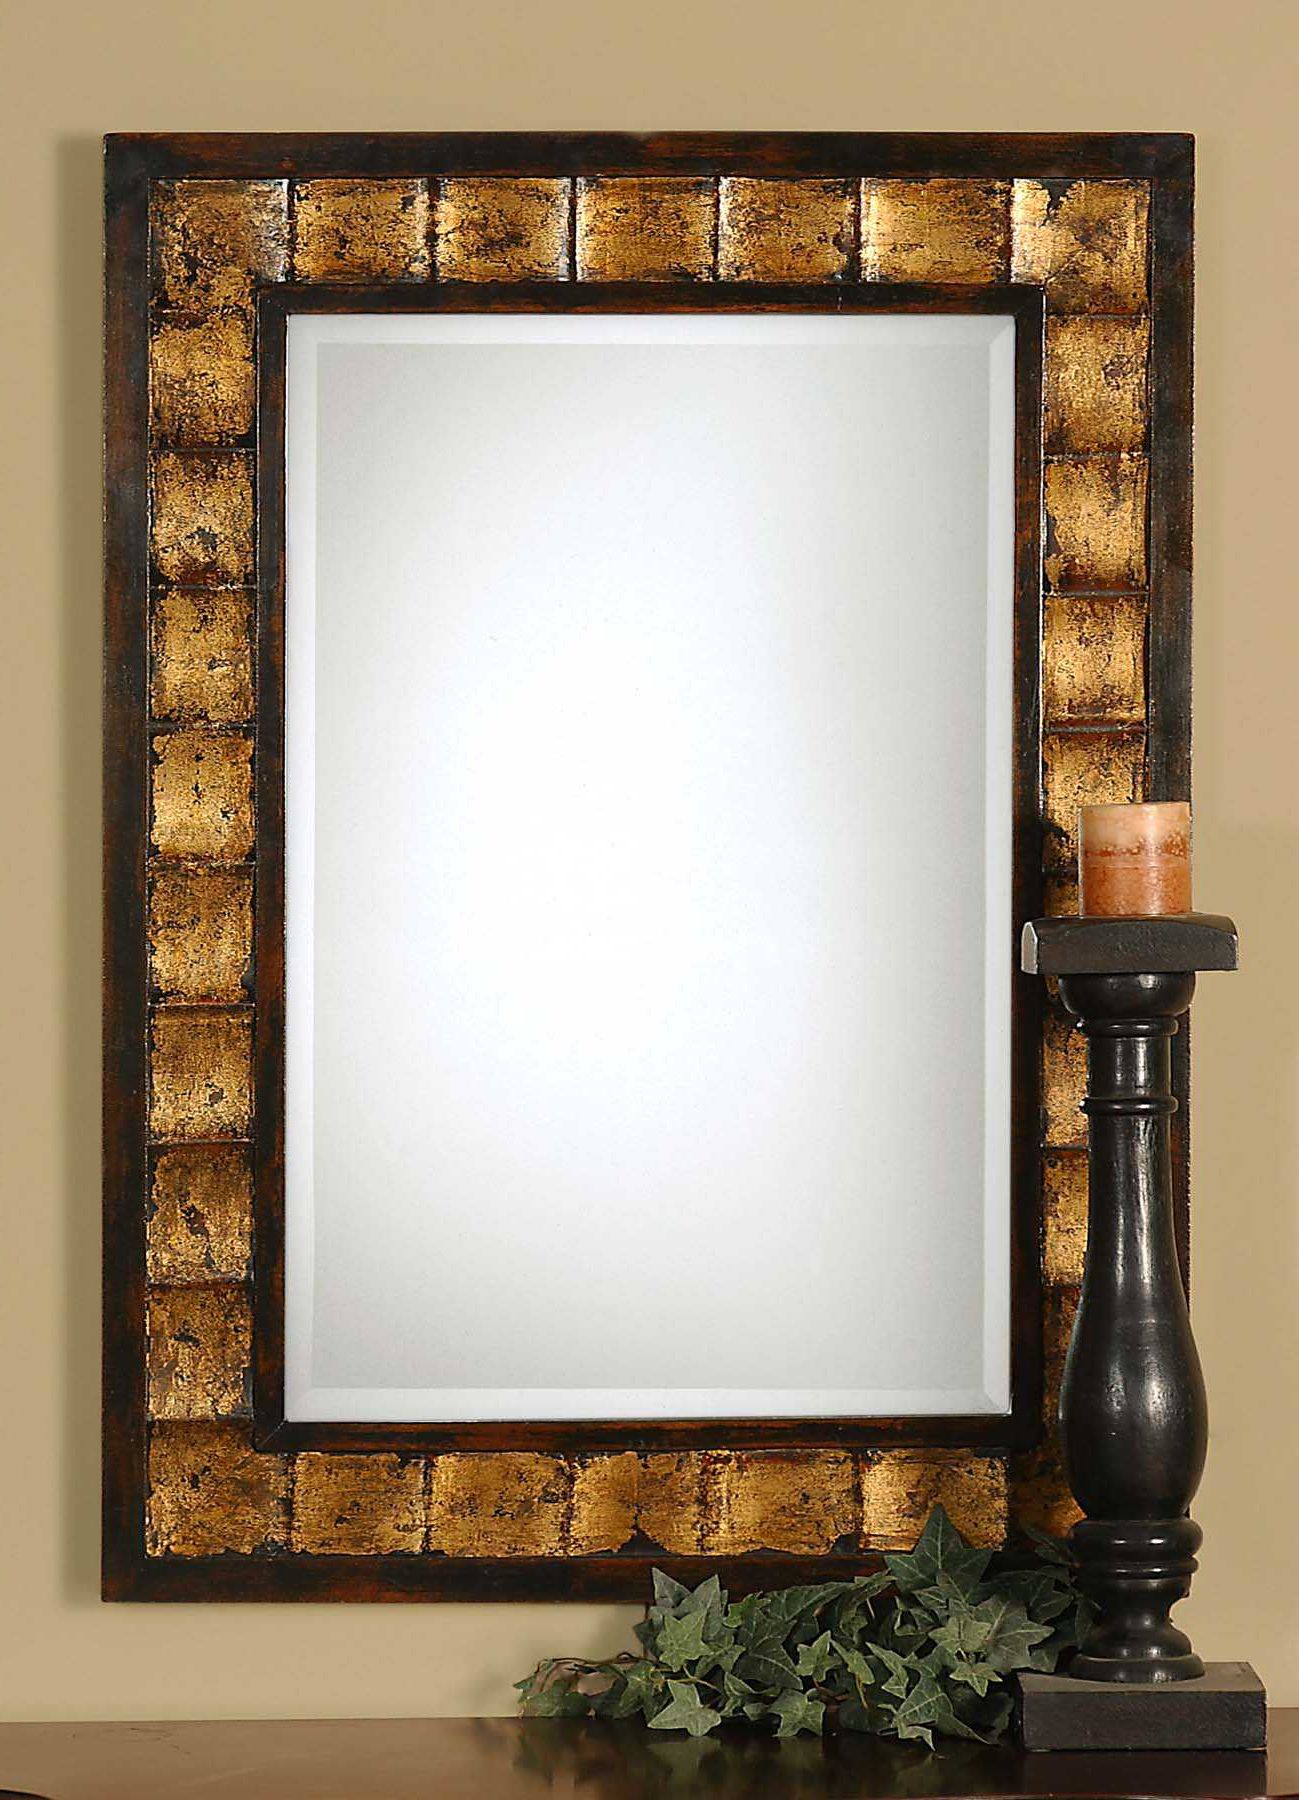 Gold Decorative Wall Mirrors Inside 2020 Uttermost Justus 28 X 38 Decorative Gold Wall Mirror (View 11 of 15)